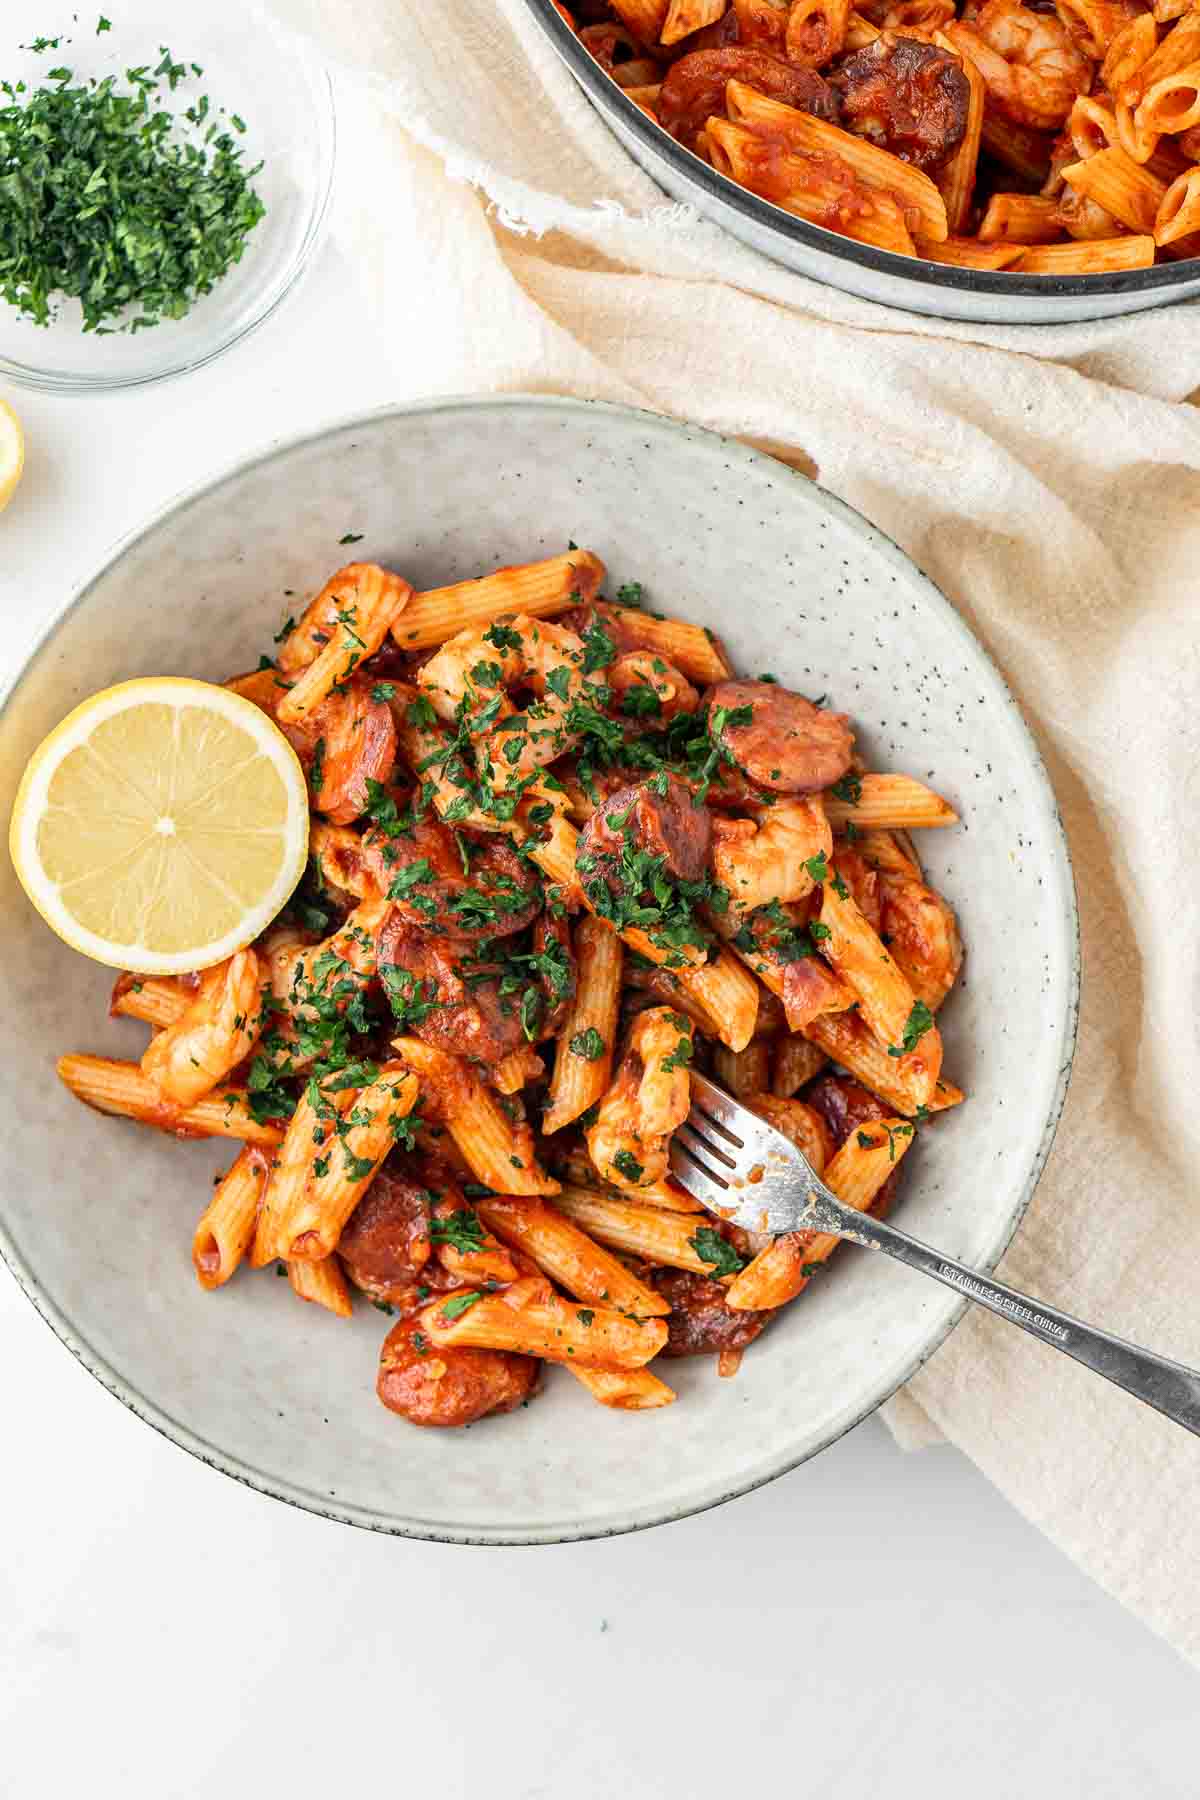 Prawn and chorizo pasta with parsley and lemon in a bowl with a fork.